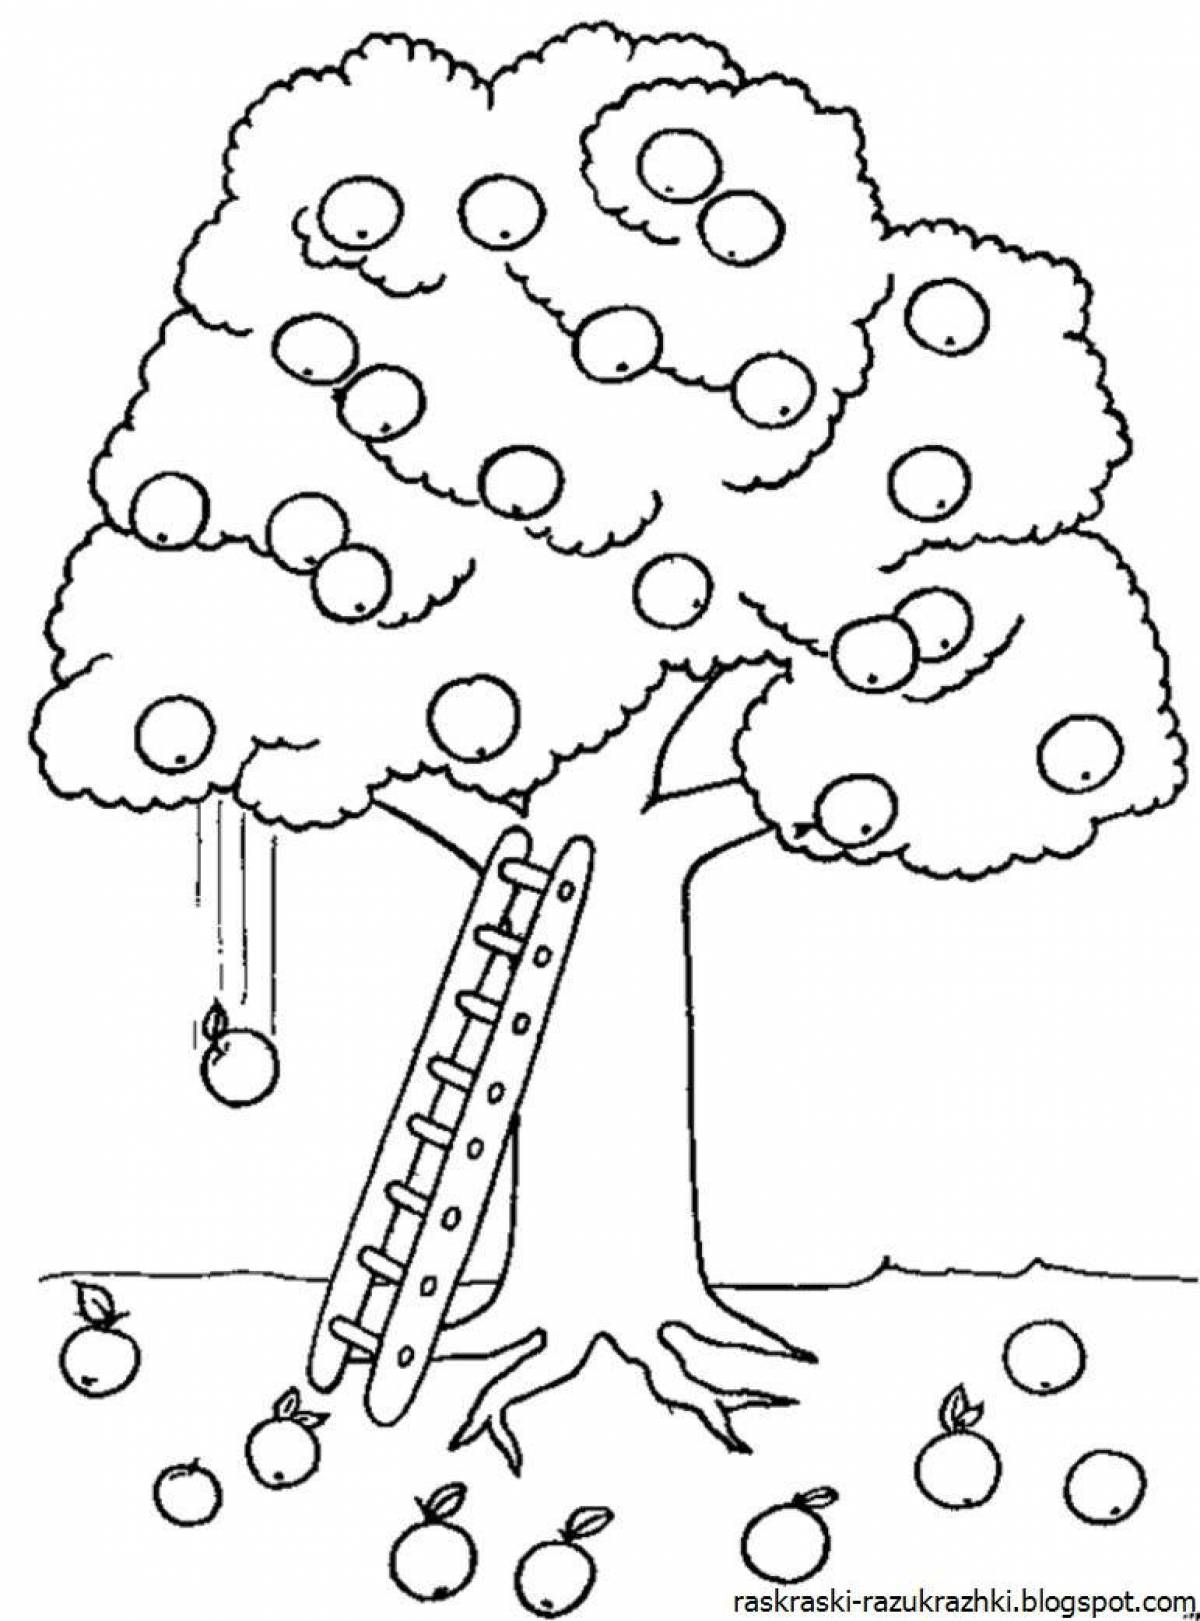 Playful tree coloring page for kids